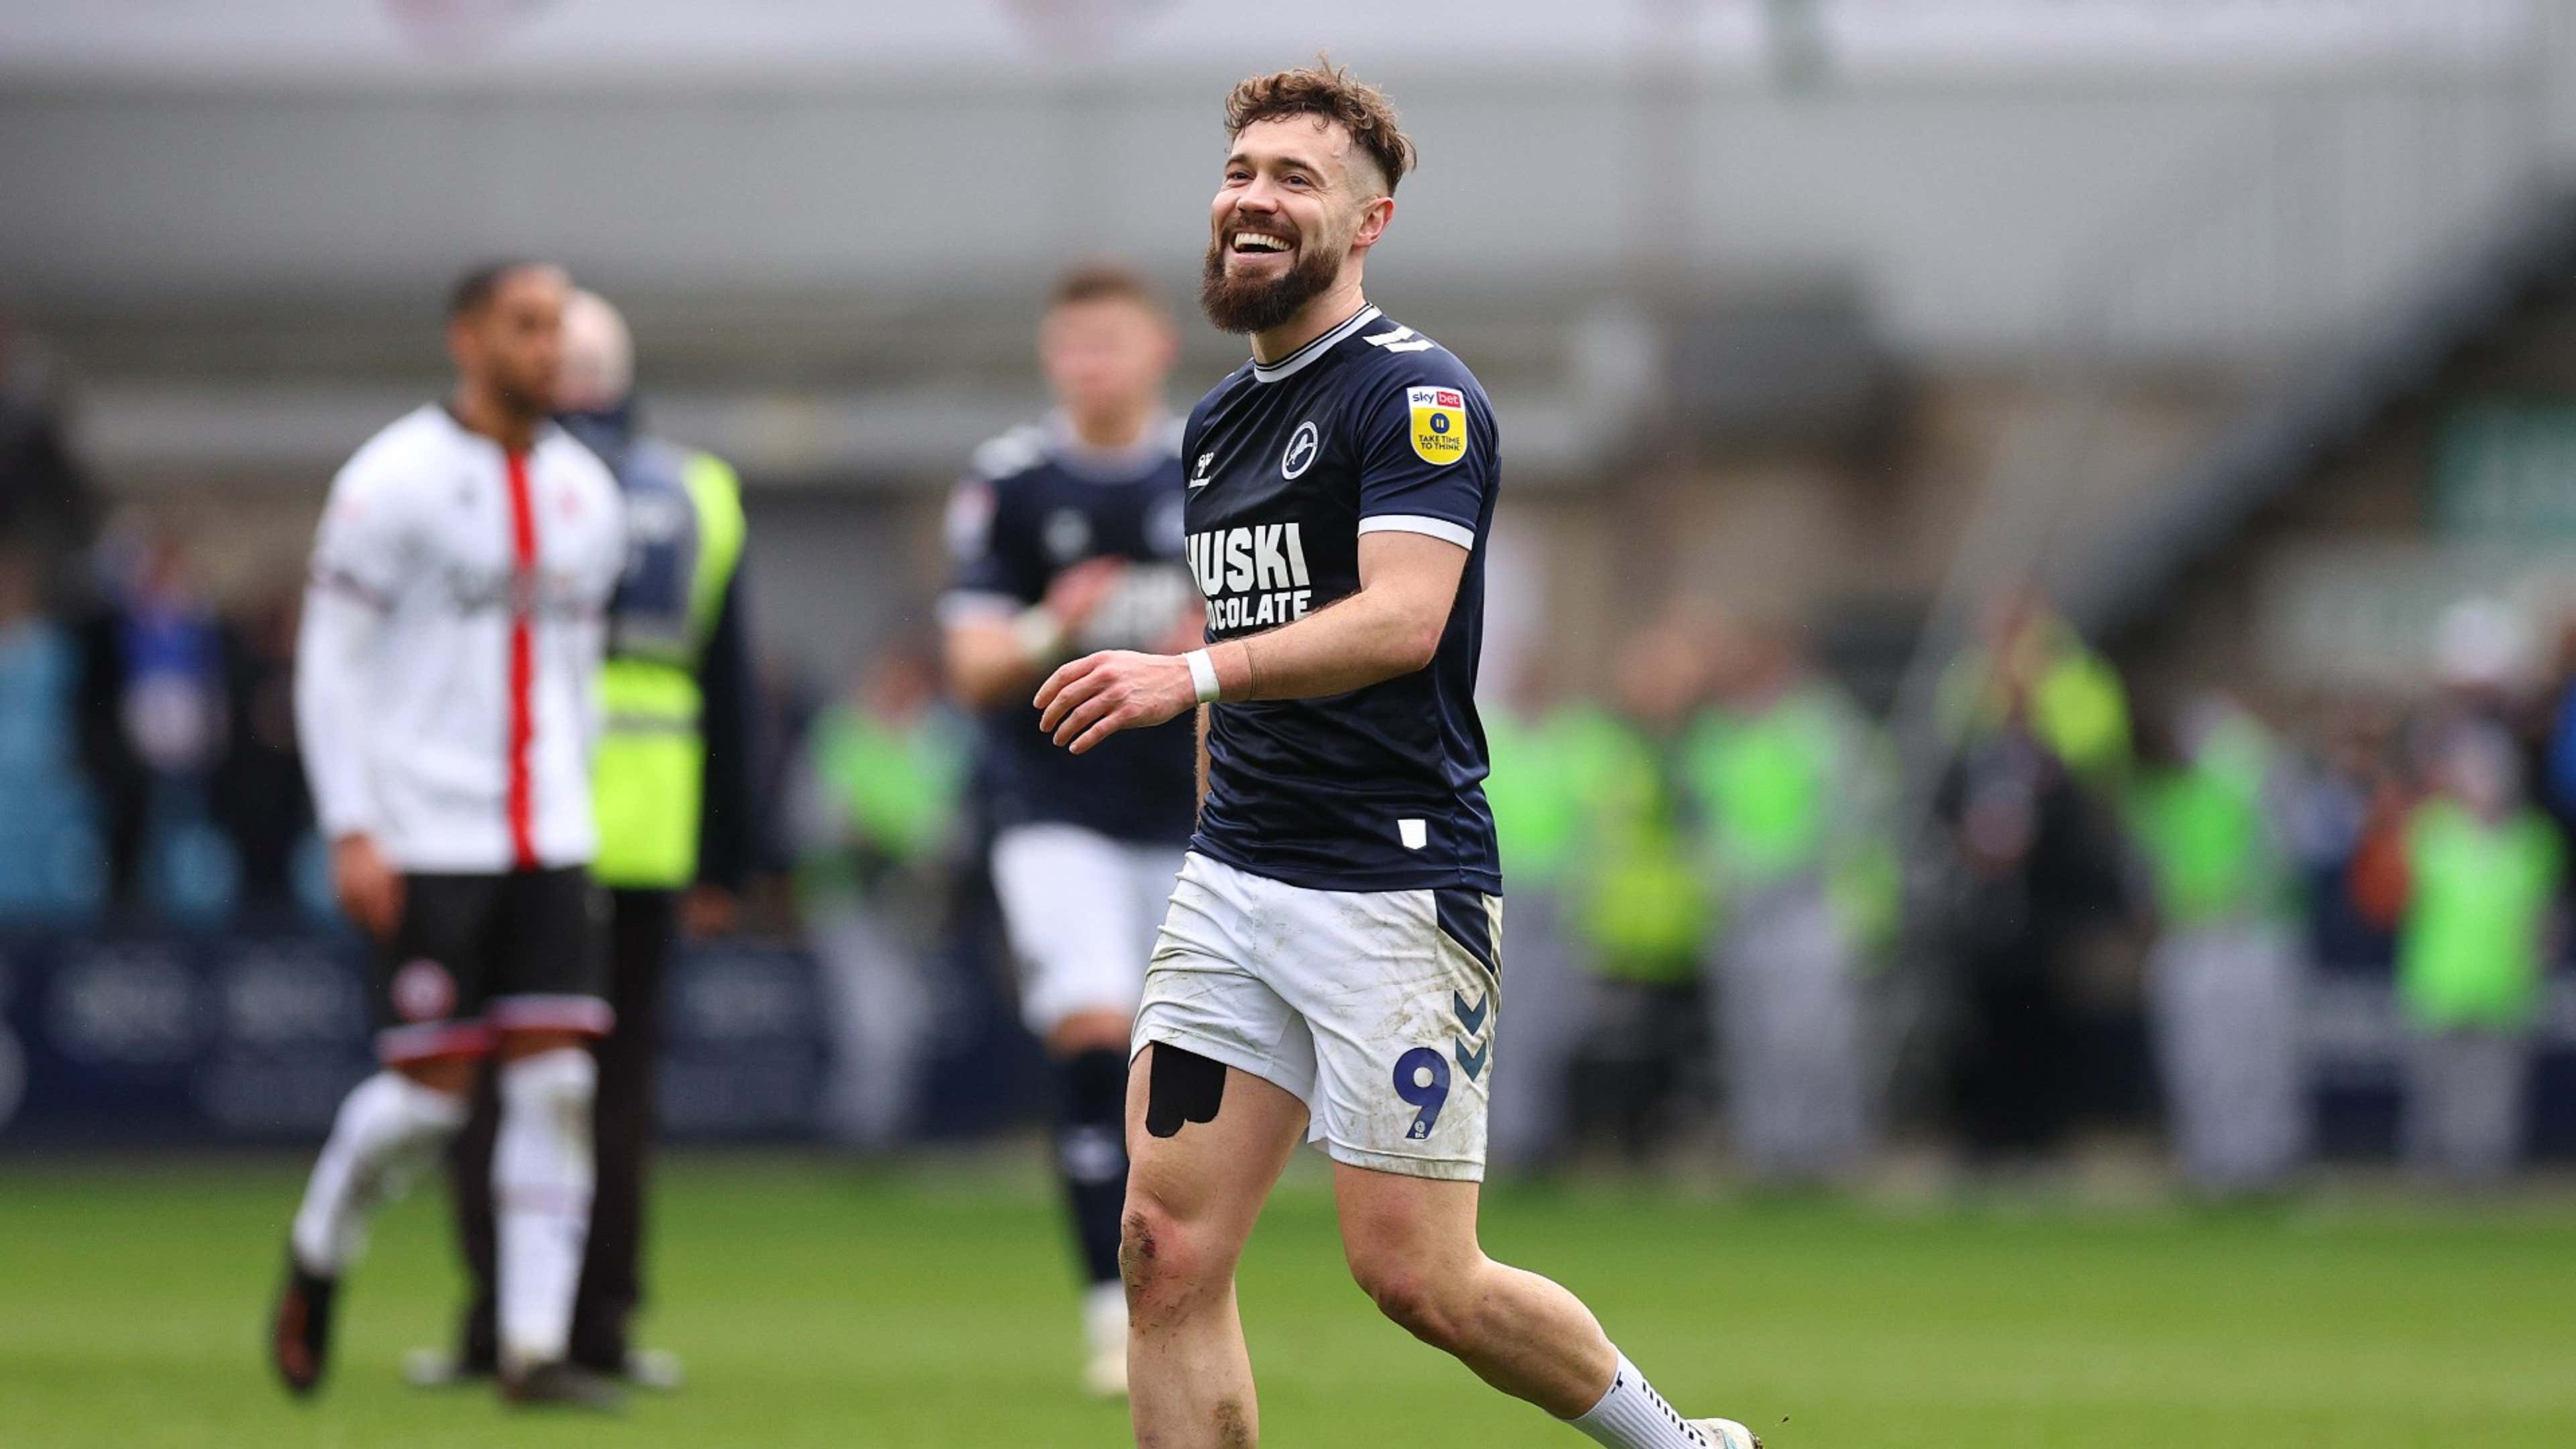 Millwall vs Luton: Where to watch the match online, live stream, TV  channels & kick-off time